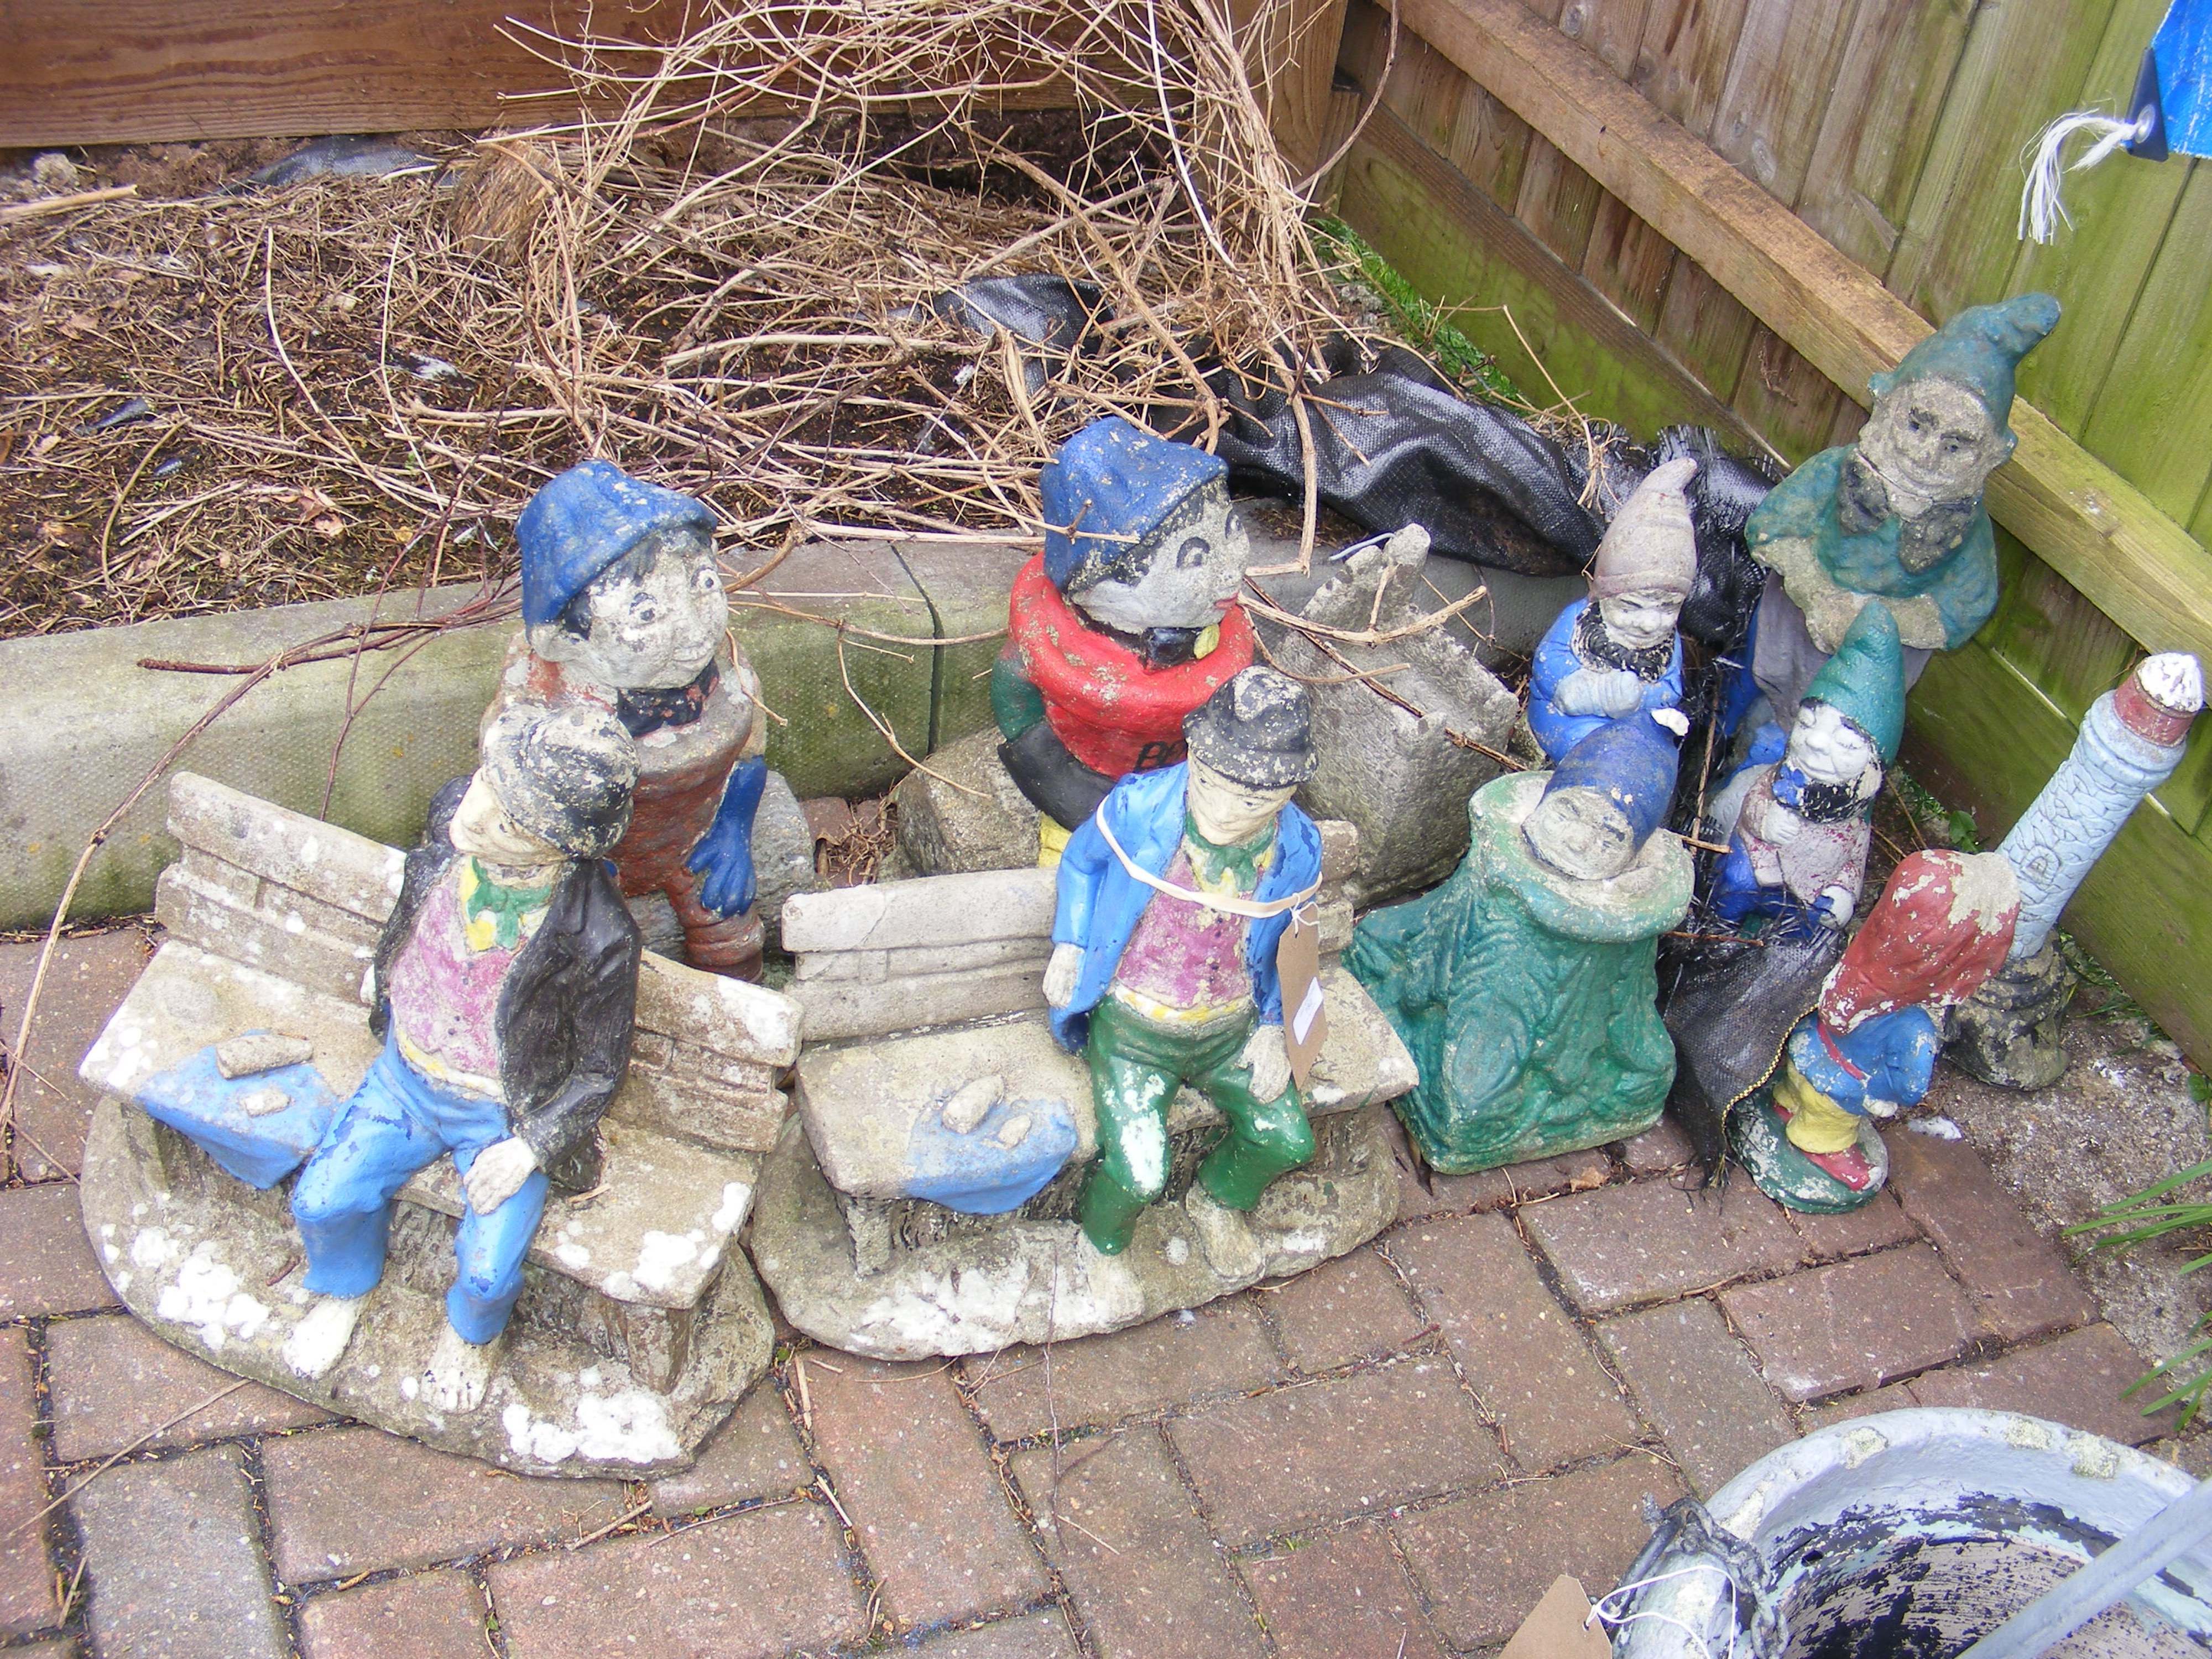 Assorted garden gnomes and ornaments, some painted